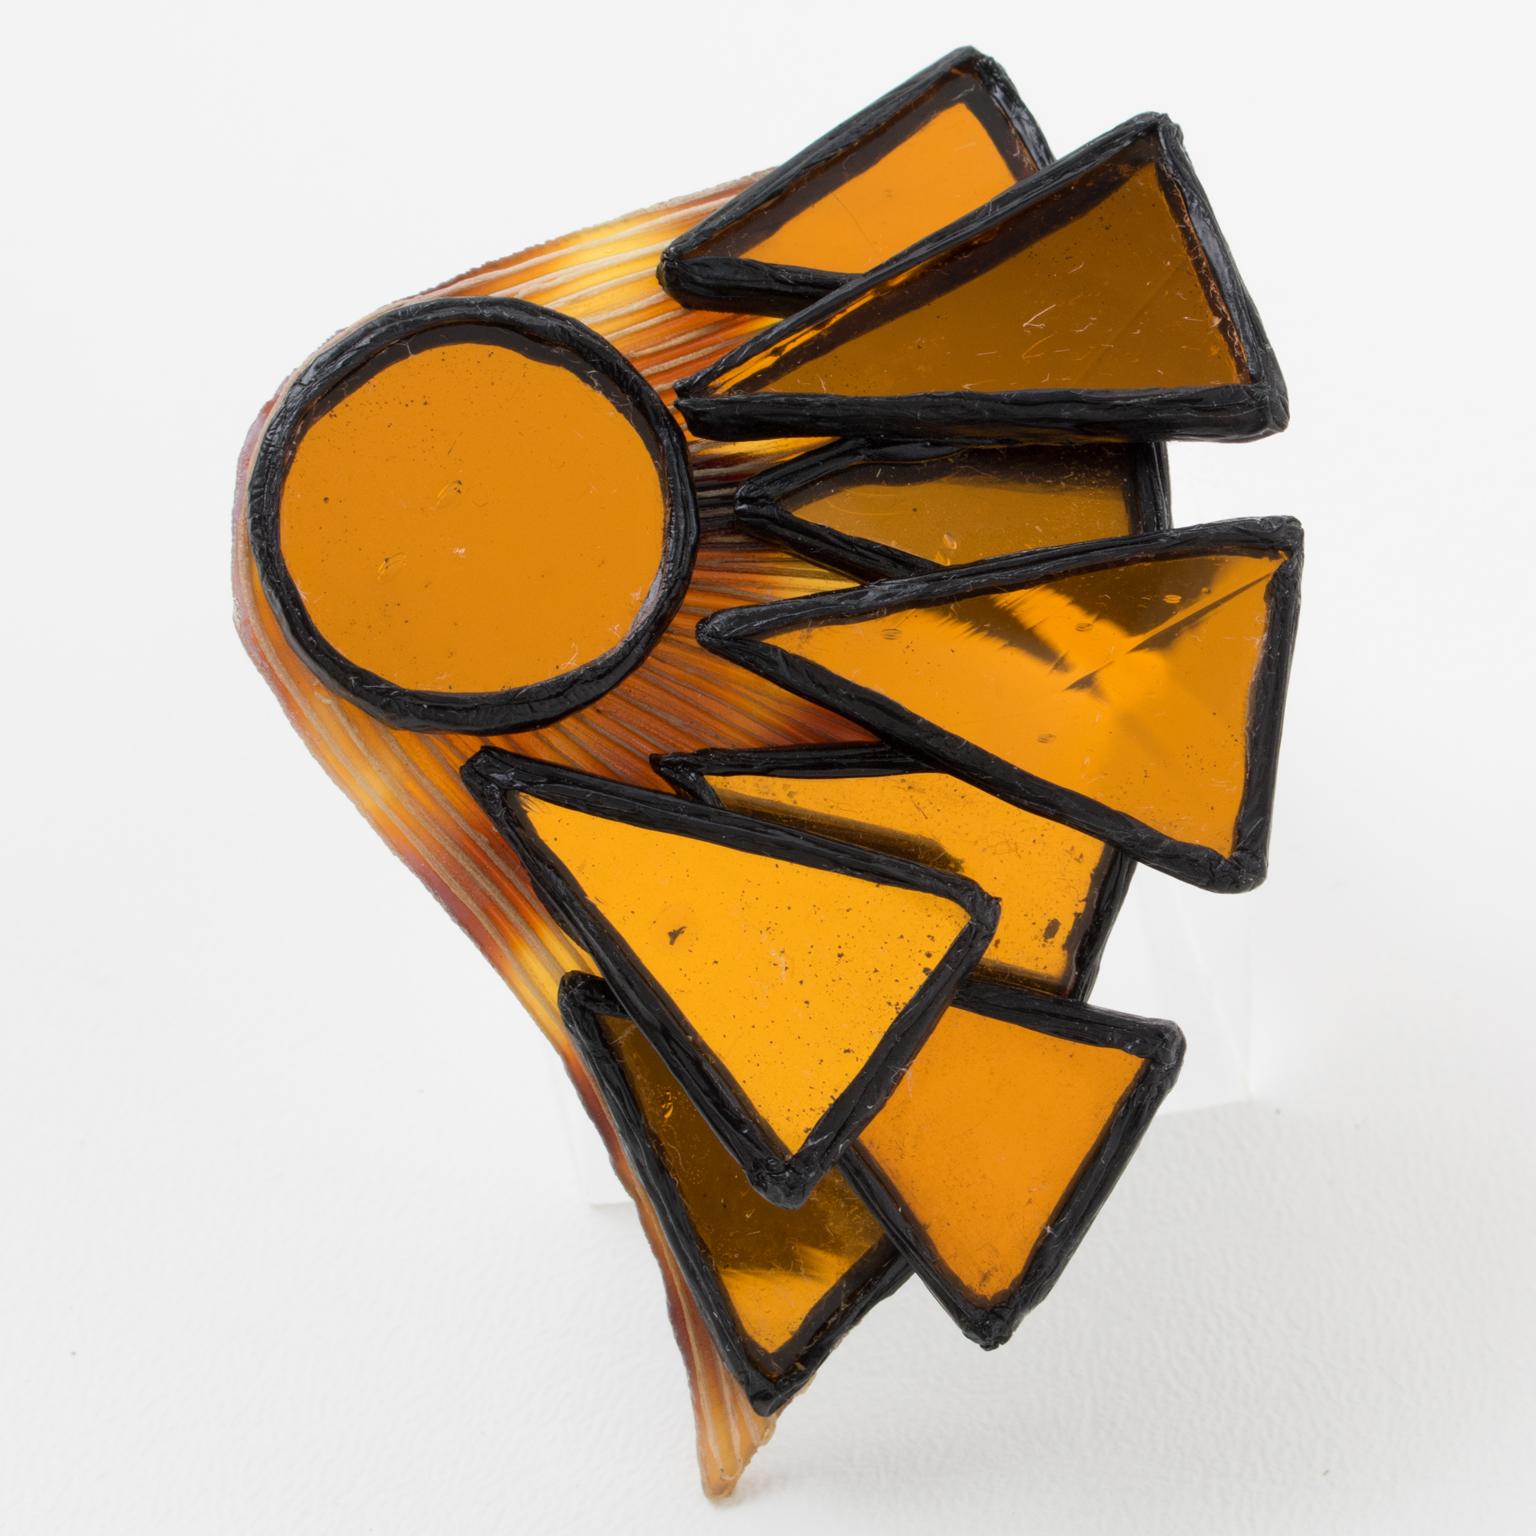 This adorable Irena Jaworska Talosel or resin pin brooch features a dimensional geometric fan shape in black resin framing, topped with a mosaic of mirrors in orange saffron color. The piece is marked underside with the artist's monogram signature.